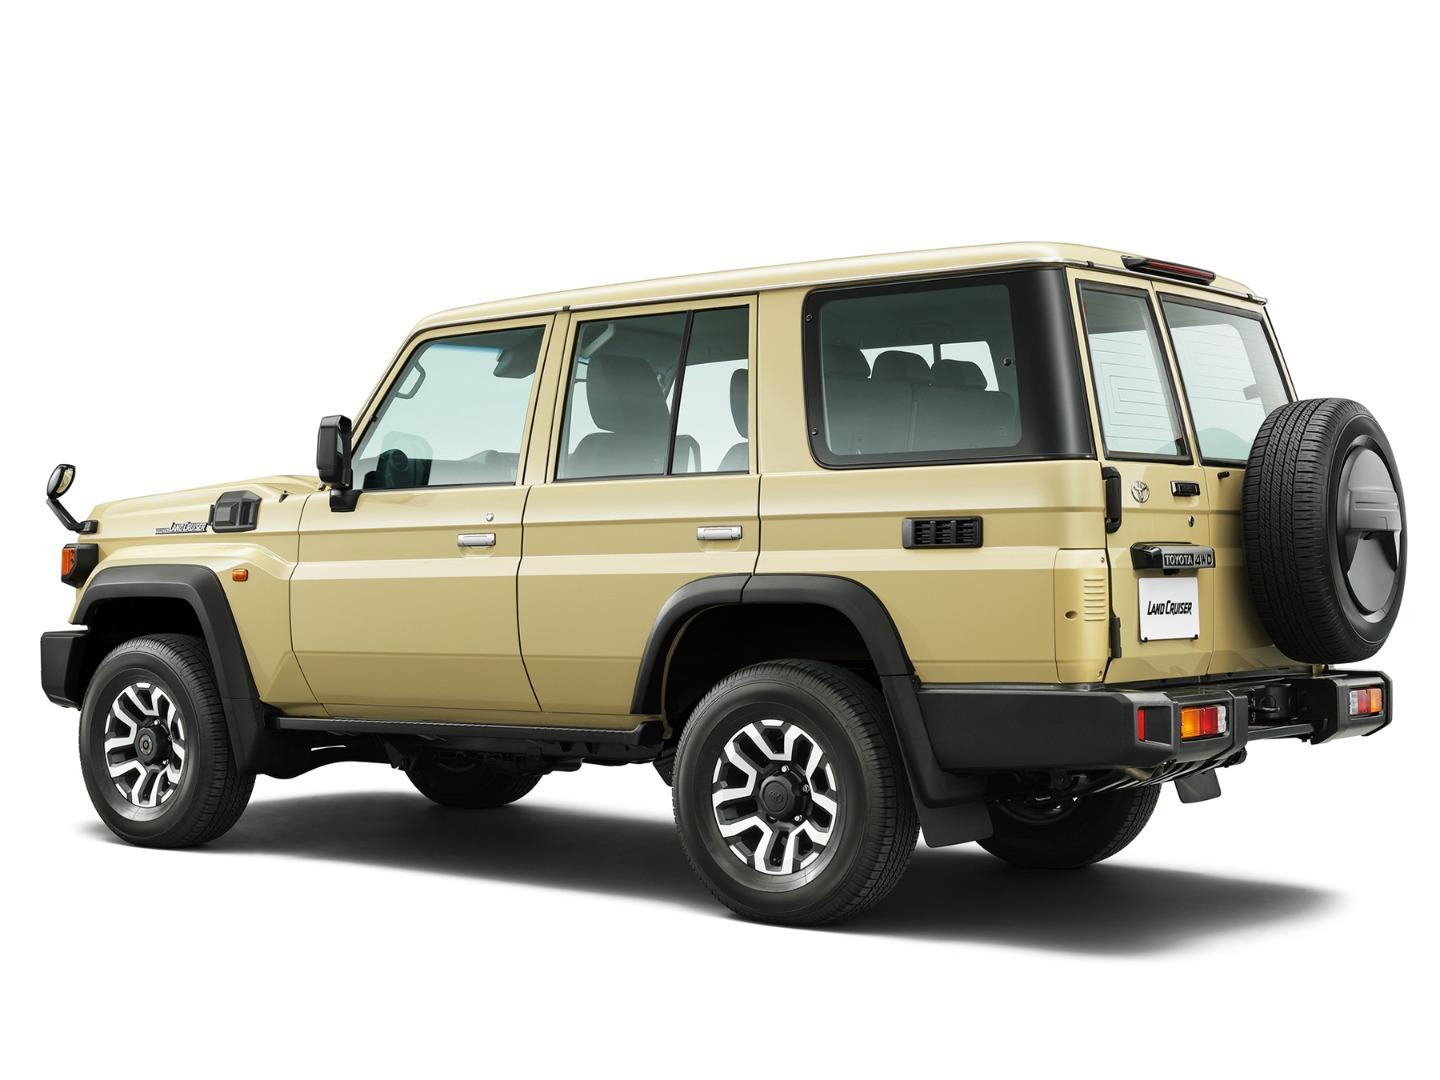 global reveal of the new toyota land cruiser 70 series and 250 series